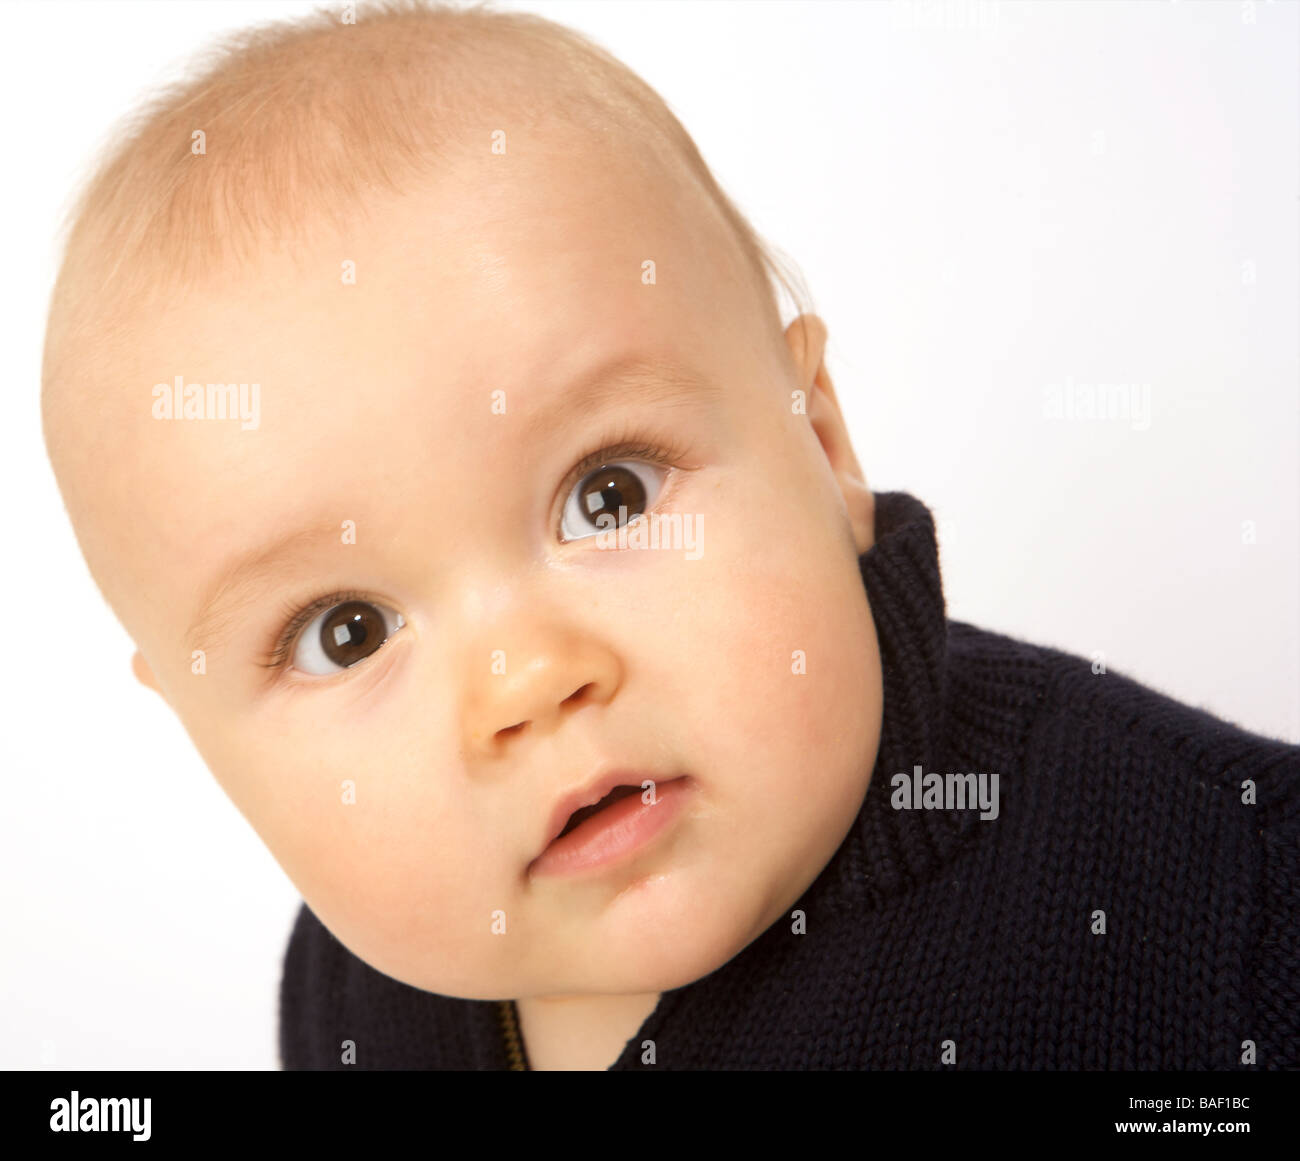 A baby looks startled against a white background Stock Photo